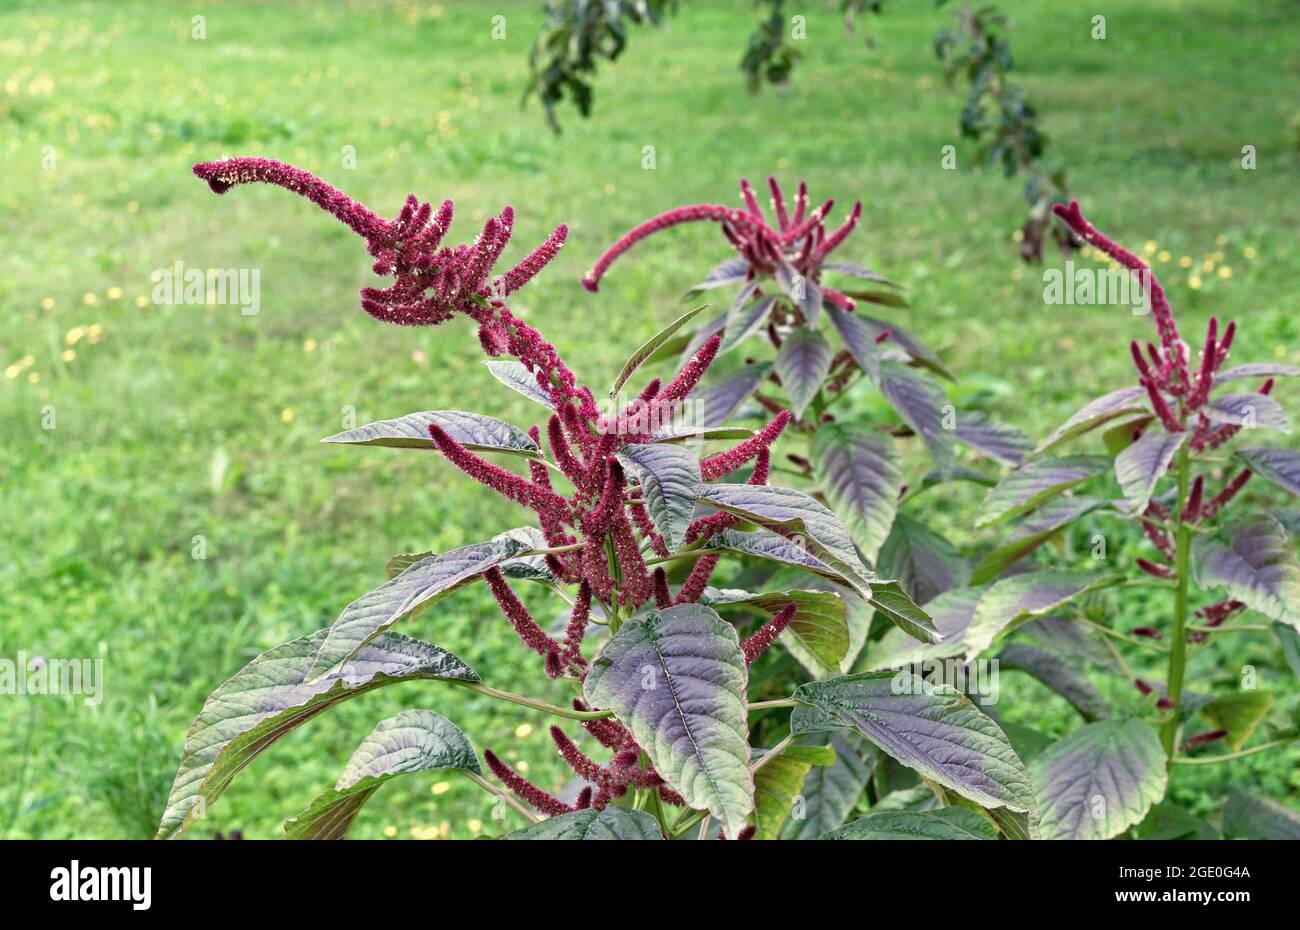 Burgundy amaranth or Aztec wheat, Inca bread, medicinal plant and cereal. Stock Photo